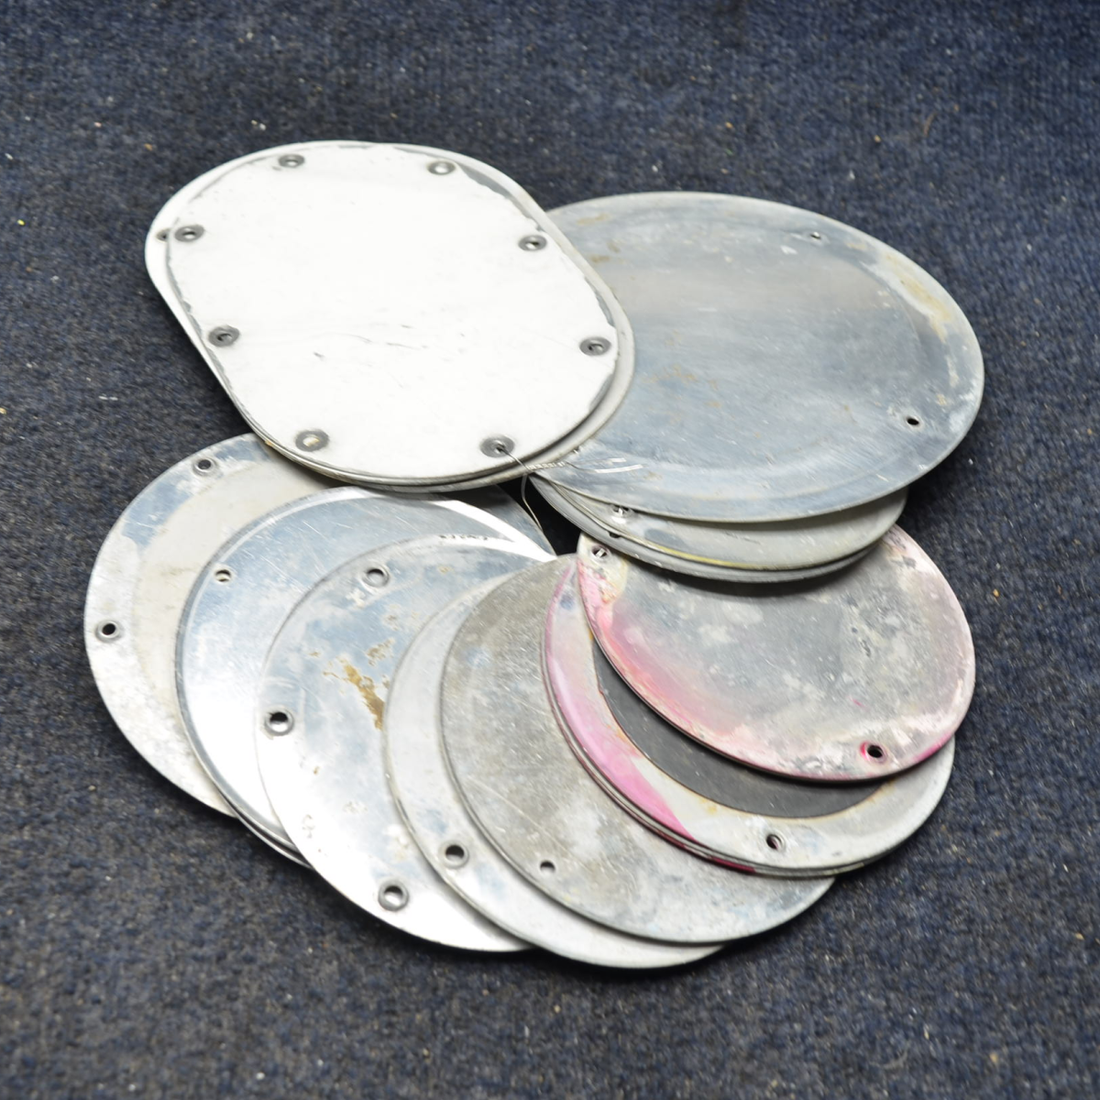 Used aircraft parts for sale, Lot of Cover plates Cessna Piper PA28 LOT OF COVER PLATES. DIFFERENT PLANES MECHANIC SPECIAL